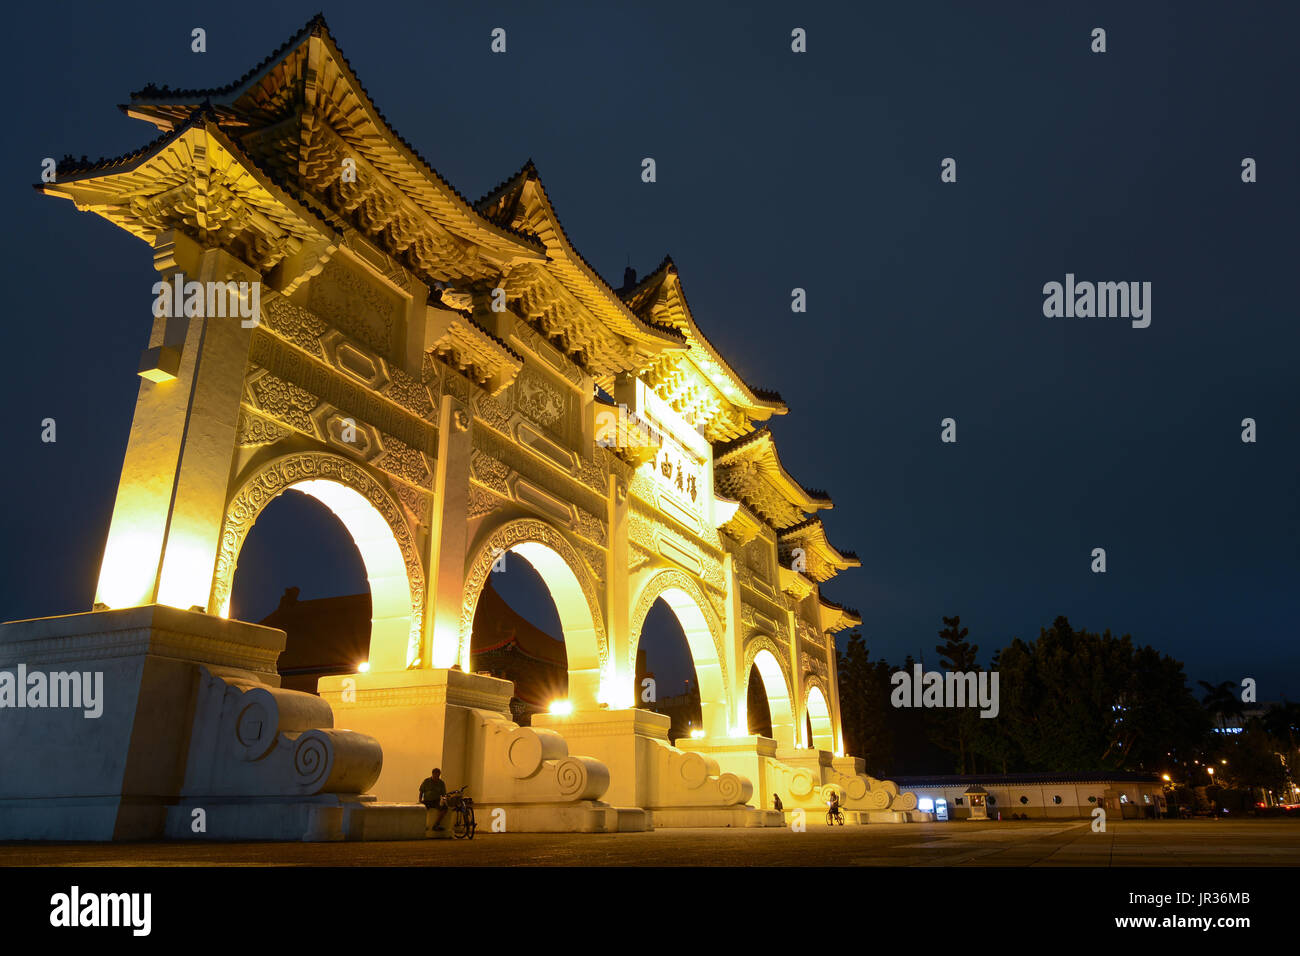 Night view of the Gate of Integrity at Liberty Square in Taipei, Taiwan. The Chinese text says: 'Liberty Square' Stock Photo